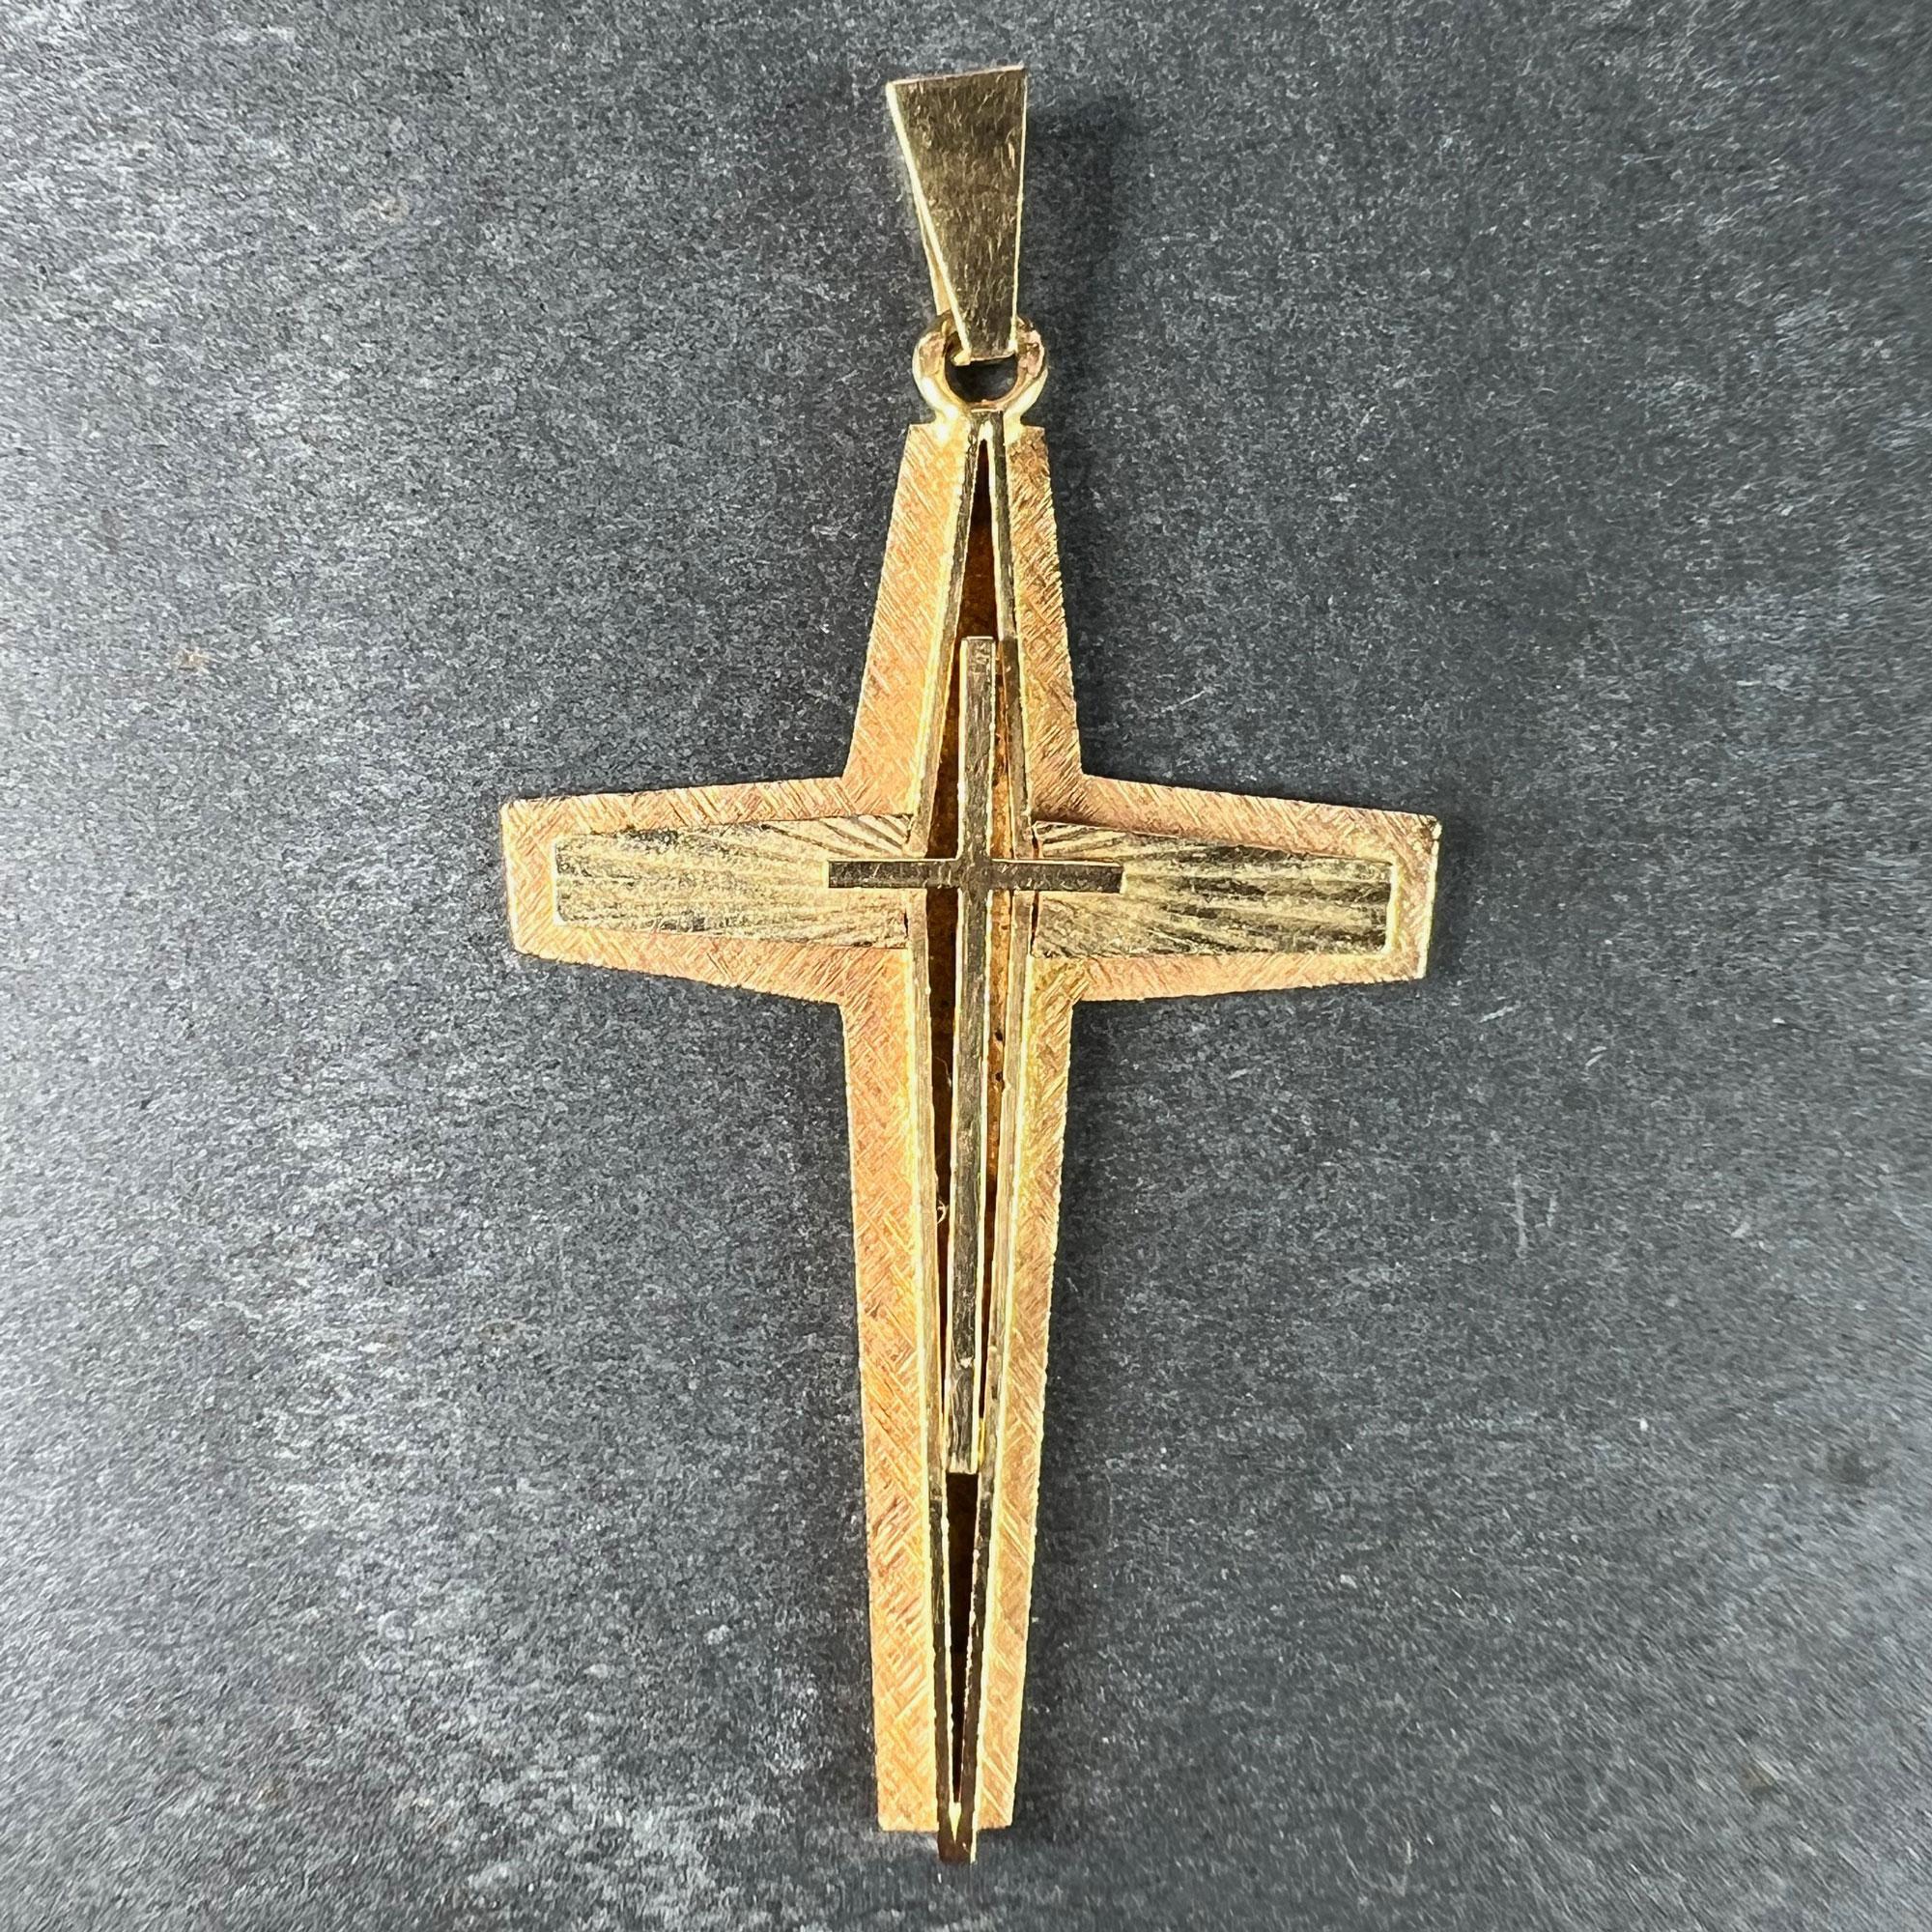 A French 18 karat (18K) yellow gold pendant designed as a cross with three layers. The base layer with a cross-hatched textured surface. The second layer is raised and hollow to the vertical, with a radiating pattern to the horizontal arms. The